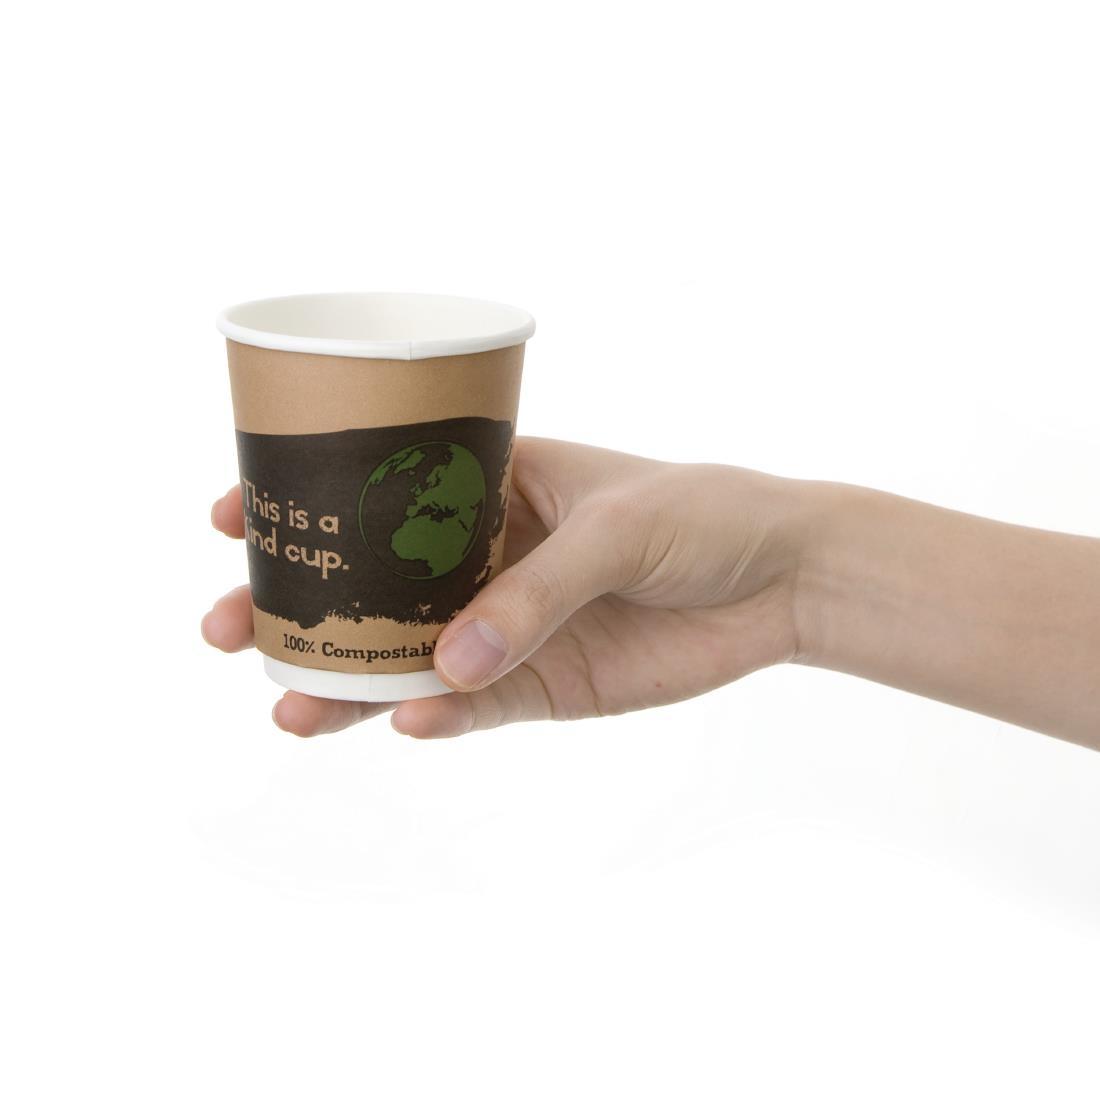 Fiesta Compostable Coffee Cups Double Wall 227ml / 8oz (Pack of 500) - DY985  - 4